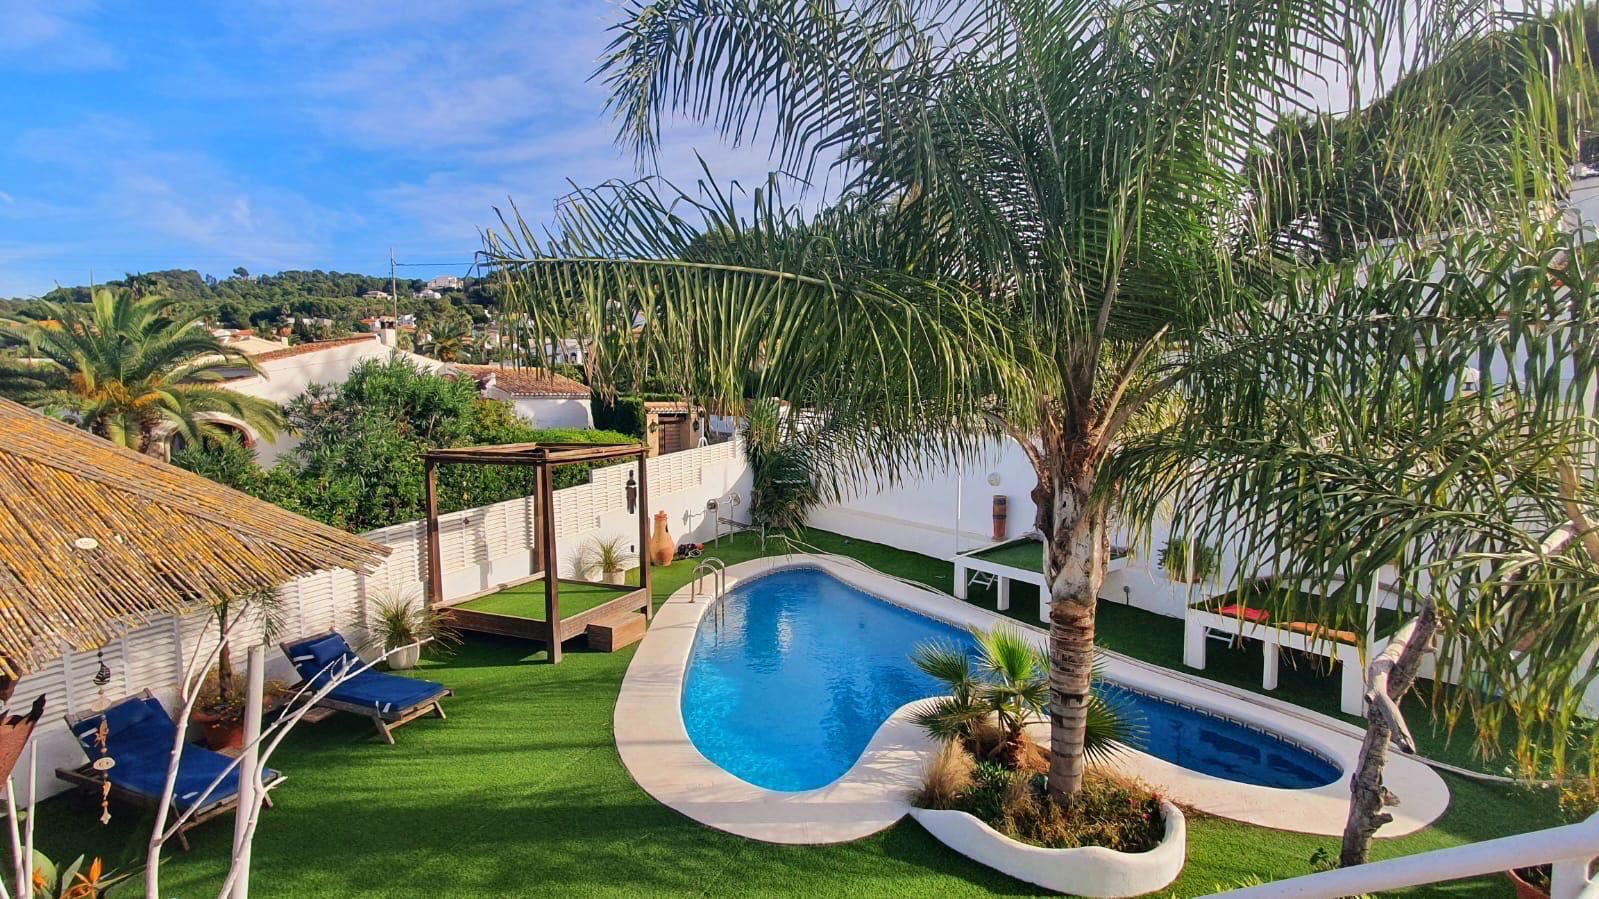 Charming villa for sale in Jávea, with swimming pool, barbecue area, garage and 1Km from the Arenal beach.